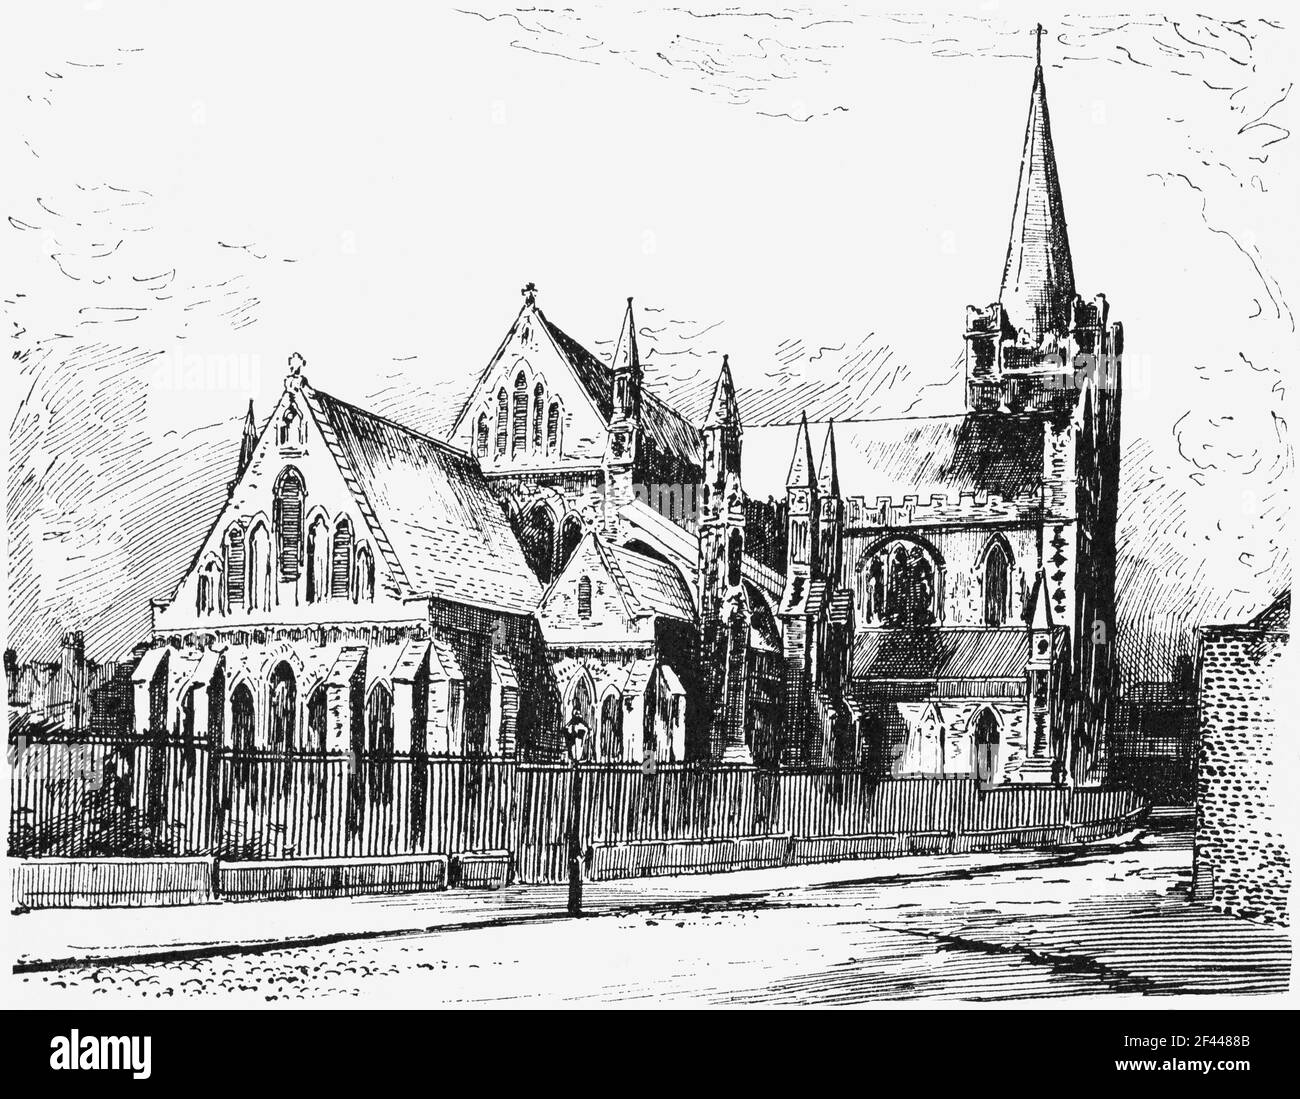 19th Century illustration of Saint Patrick's Cathedral in Dublin, from St Patrick's Close was founded in 1191 and throughout its long history has contributed much to Irish life, like Jonathan Swift, author of Gulliver's Travels, who was Dean of the cathedral from 1713 to 1745.  When the cathedral was was thought to be in imminent danger of collapse, major reconstruction, paid for by Benjamin Guinness, took place in 1860–65. The failure to preserve records of the rebuild means little is known how much of the current building is genuinely mediæval and how much is Victorian pastiche. Stock Photo